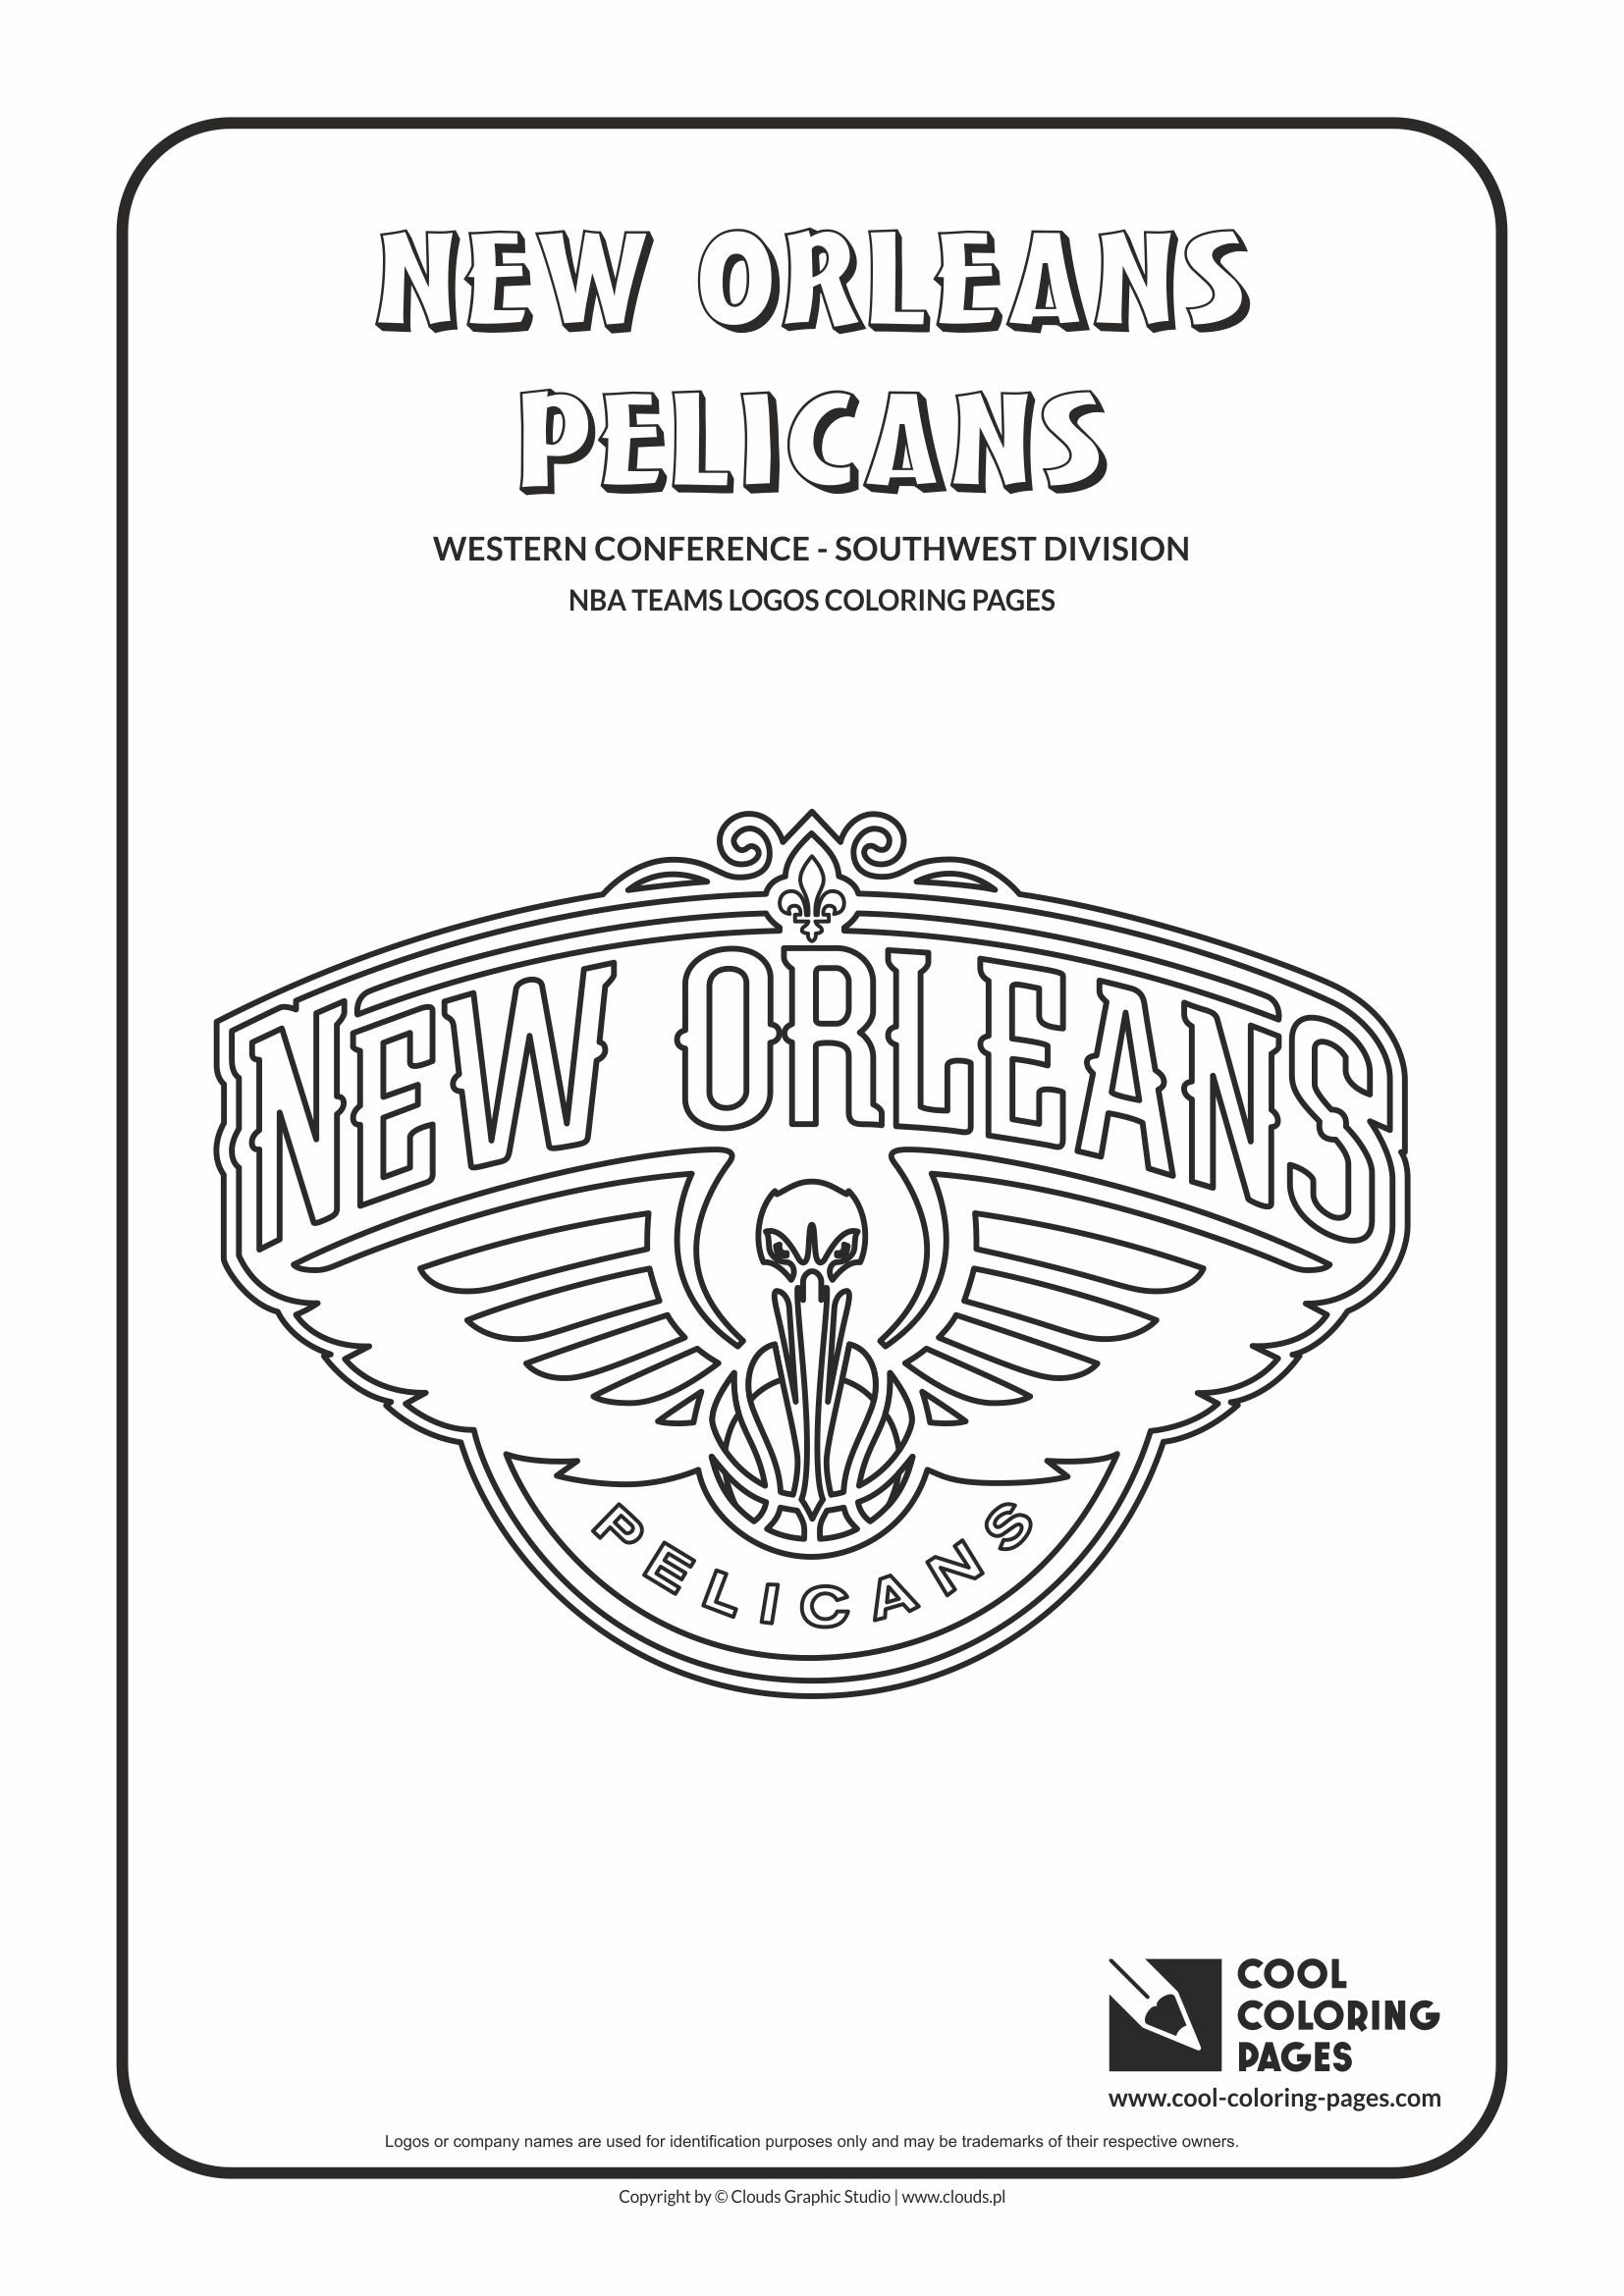 Cool Coloring Pages - NBA Basketball Clubs Logos - Western Conference - Southwest Division / New Orleans Pelicans logo / Coloring page with New Orleans Pelicans logo